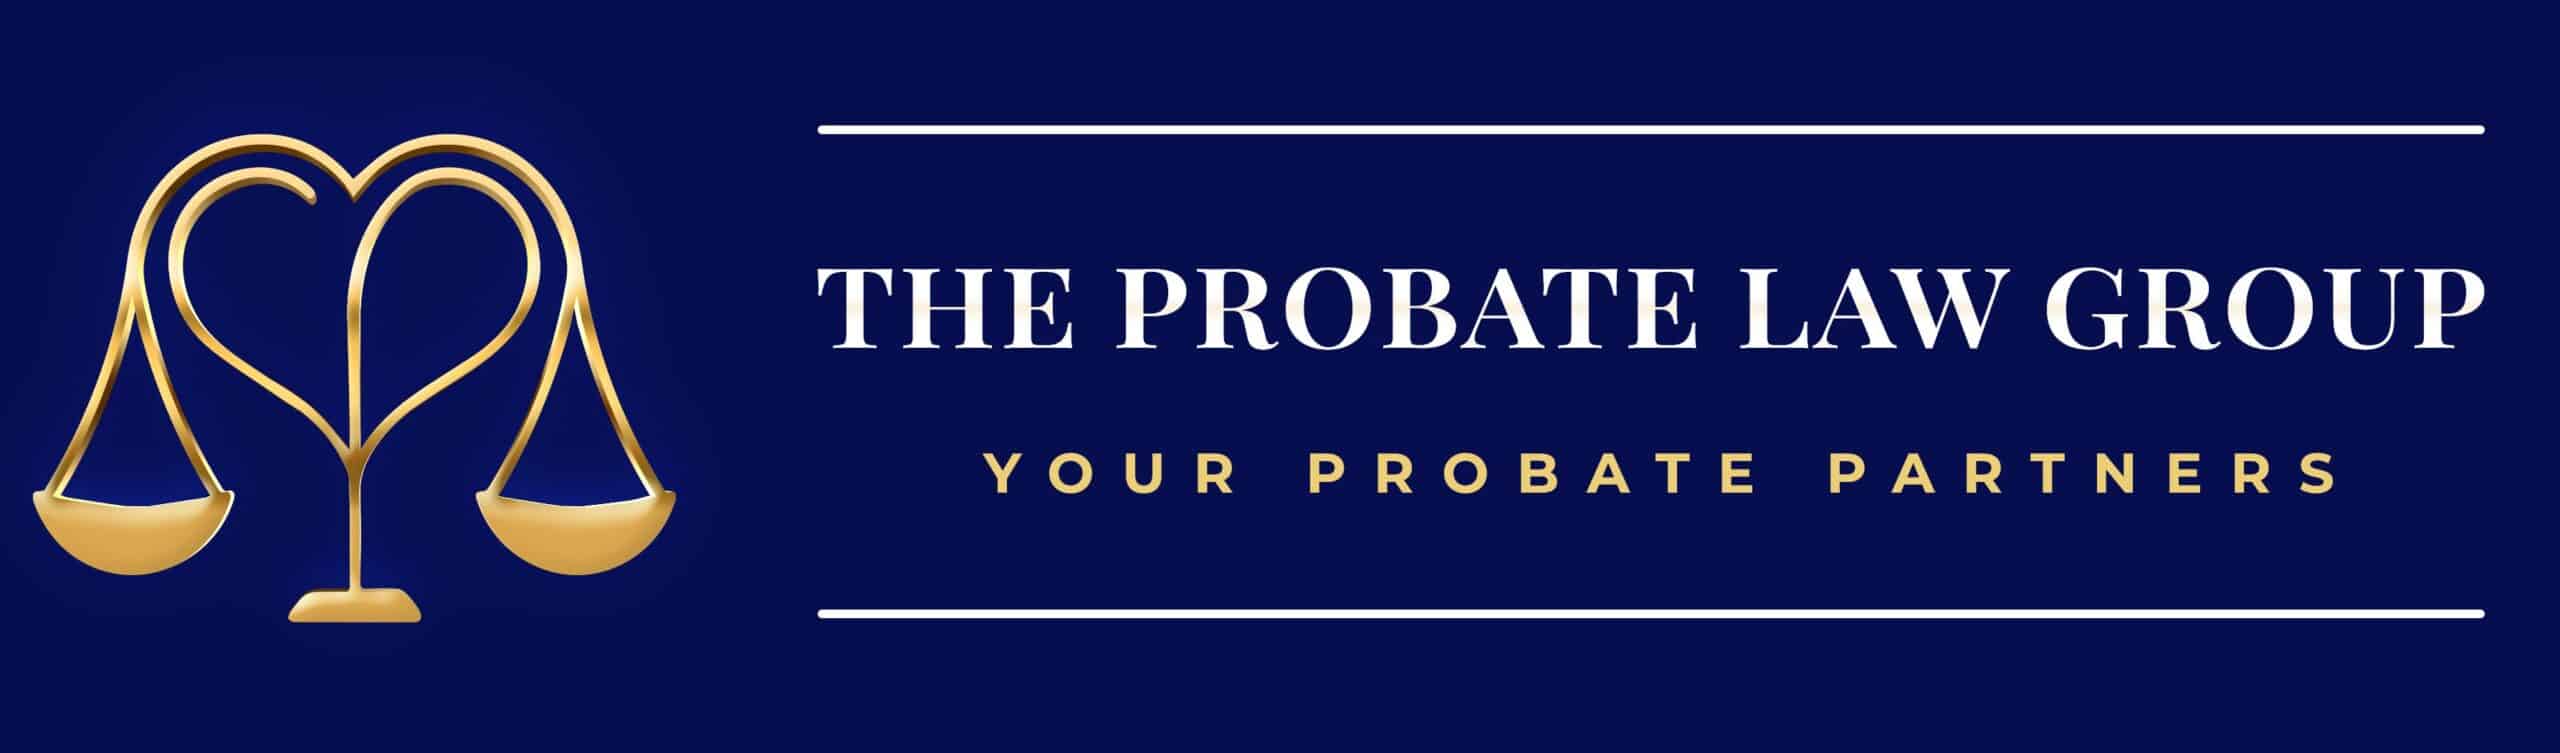 The Probate Law Group Logo